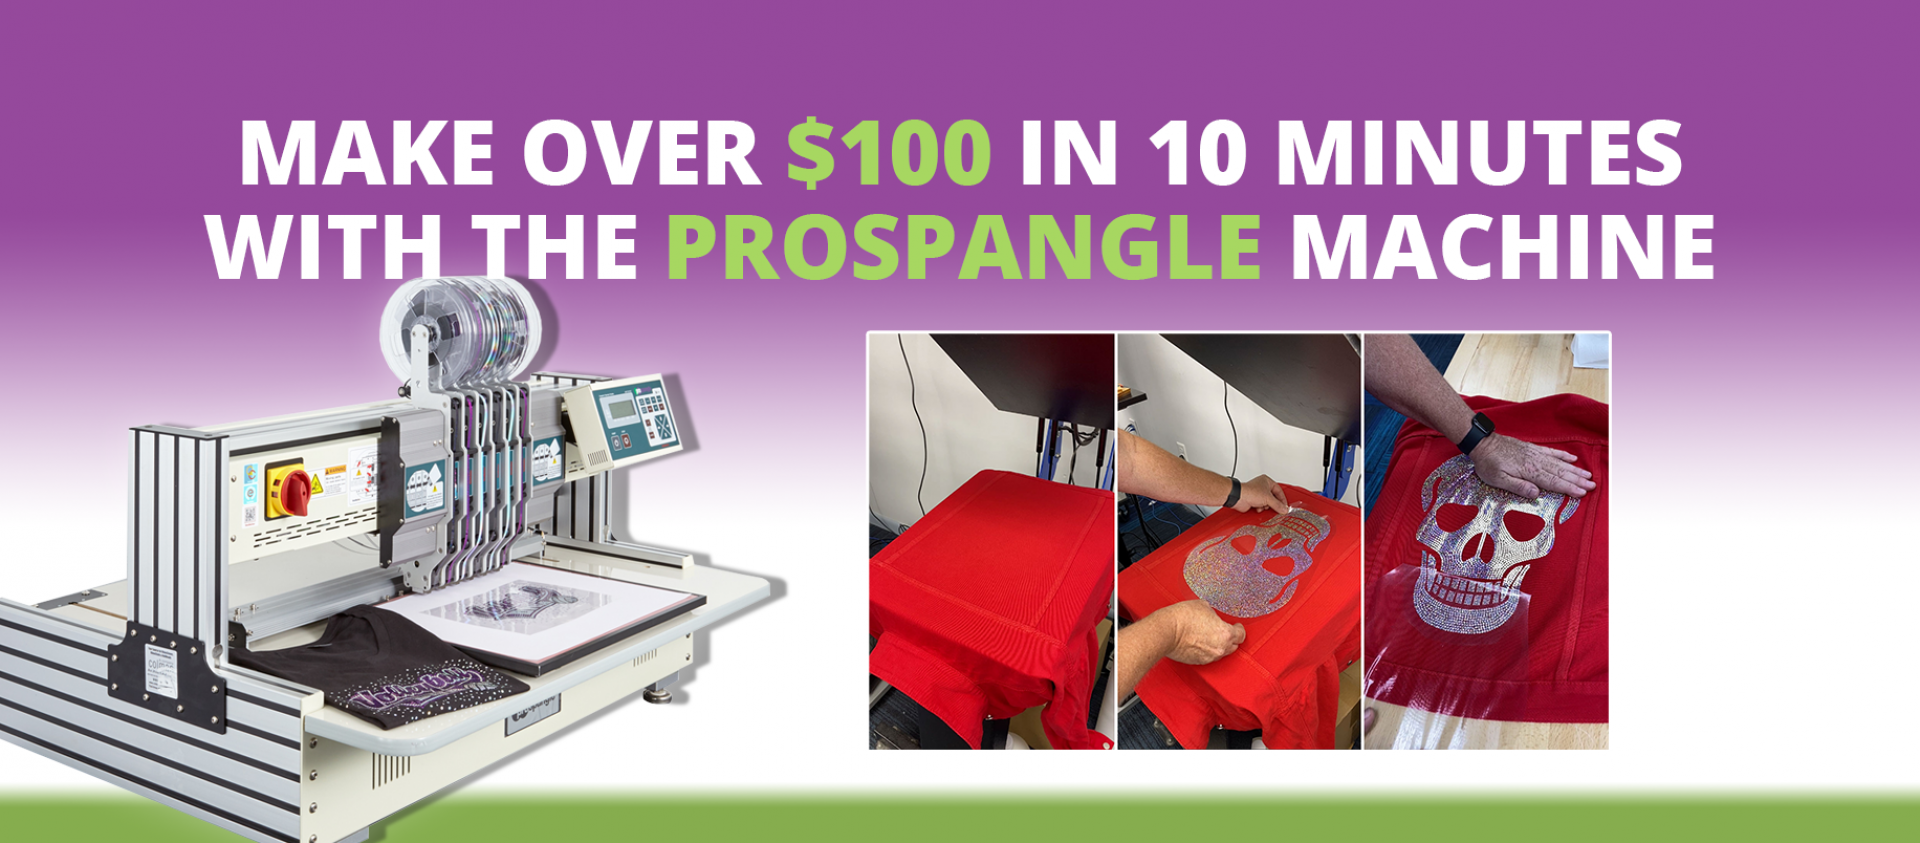 Make-Over-$100-in-10-Minutes-with-the-ProSpangle-Machine